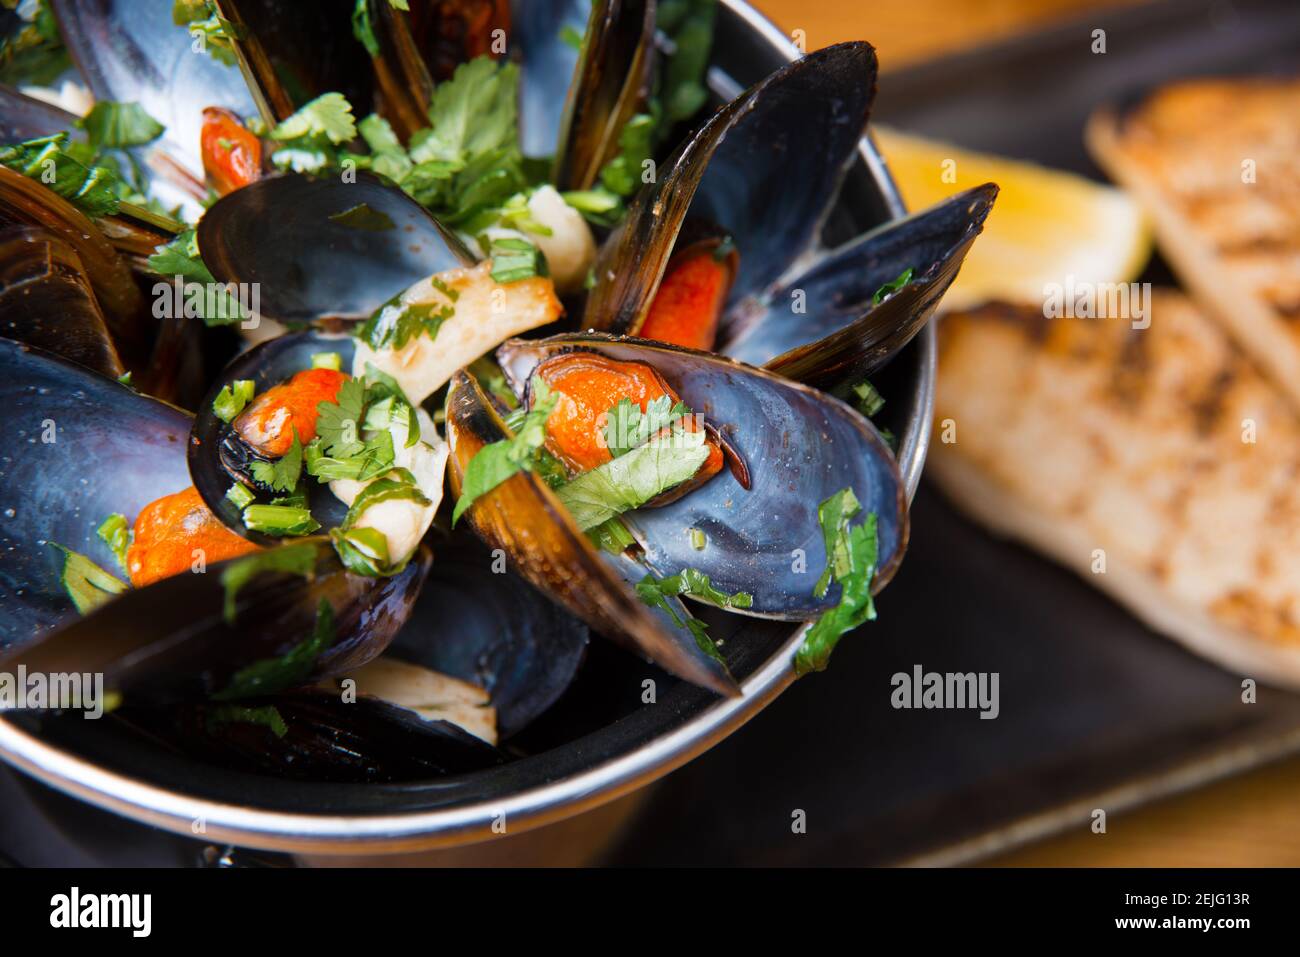 Close up photo of tasty fresh boiled mussels in a pan. Stock Photo